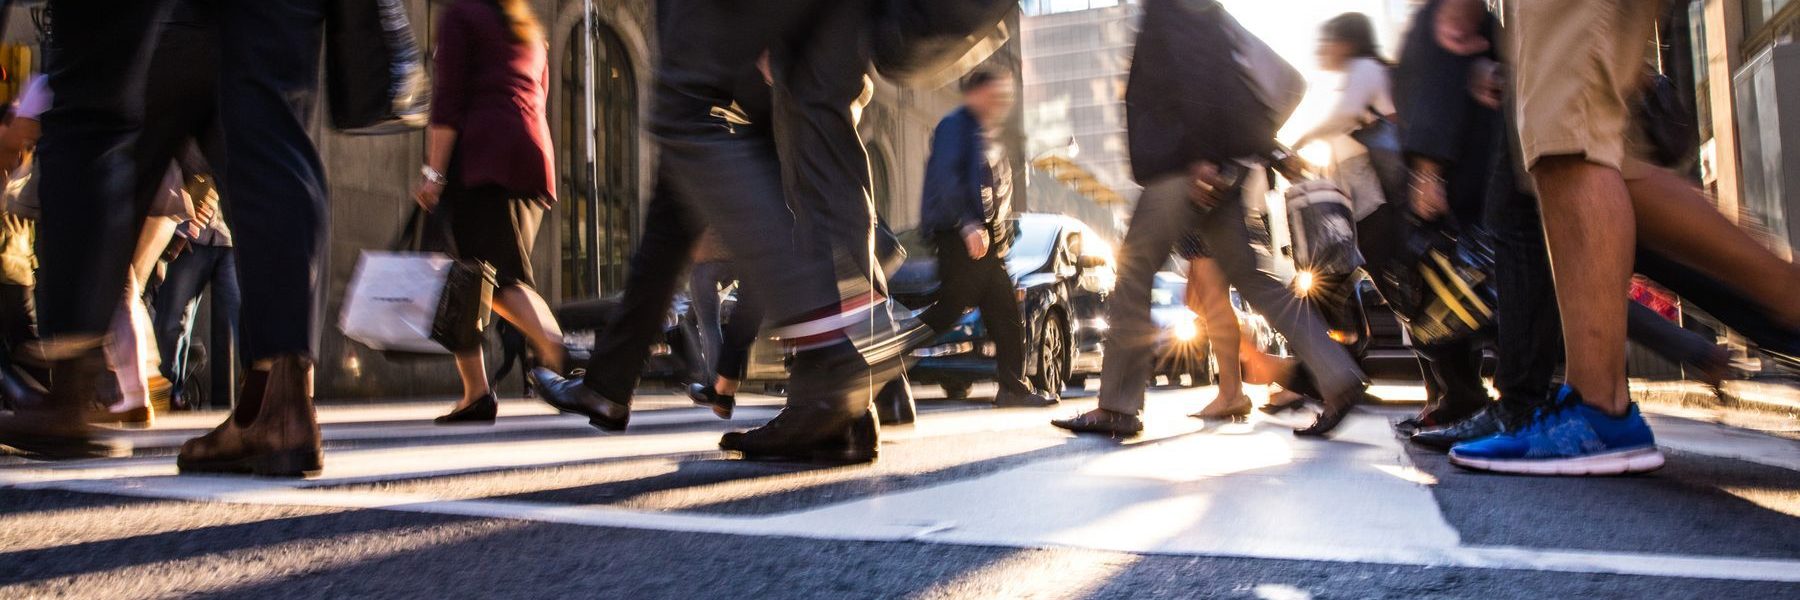 Pedestrian Accidents How They Occur and Who is at Risk